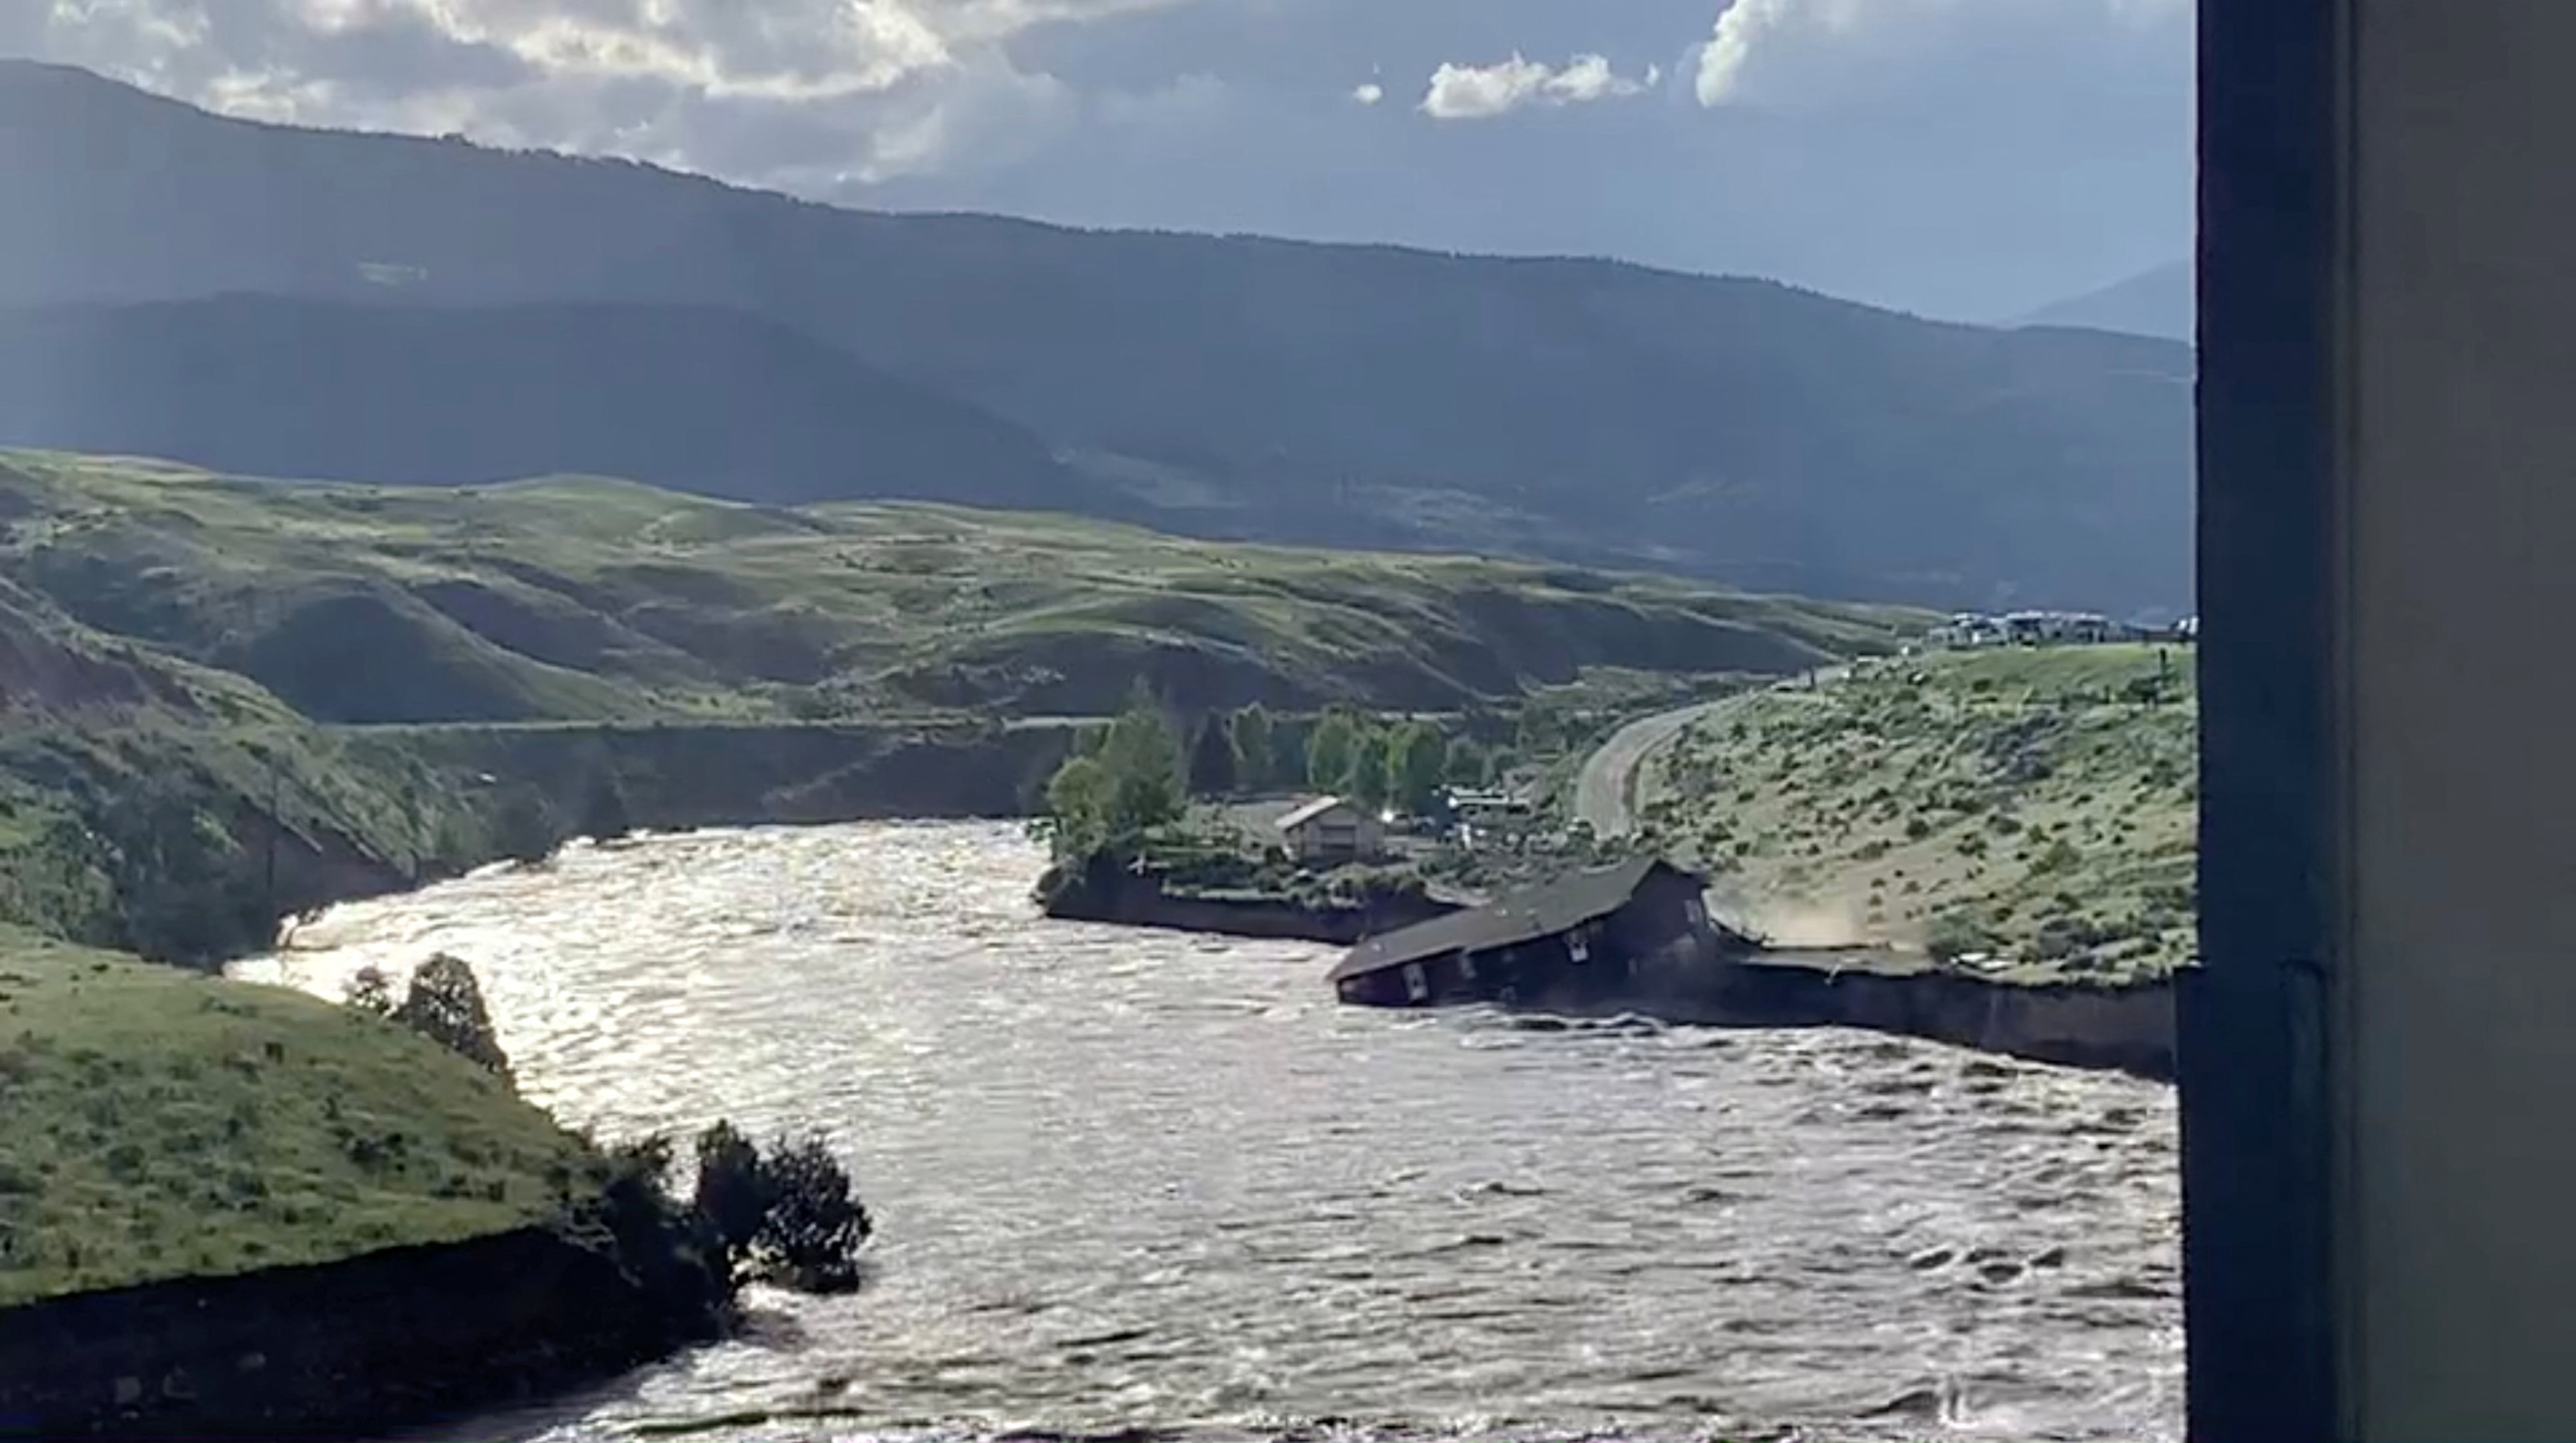 A house falls into the Yellowstone river due to flooding in Gardiner, Montana